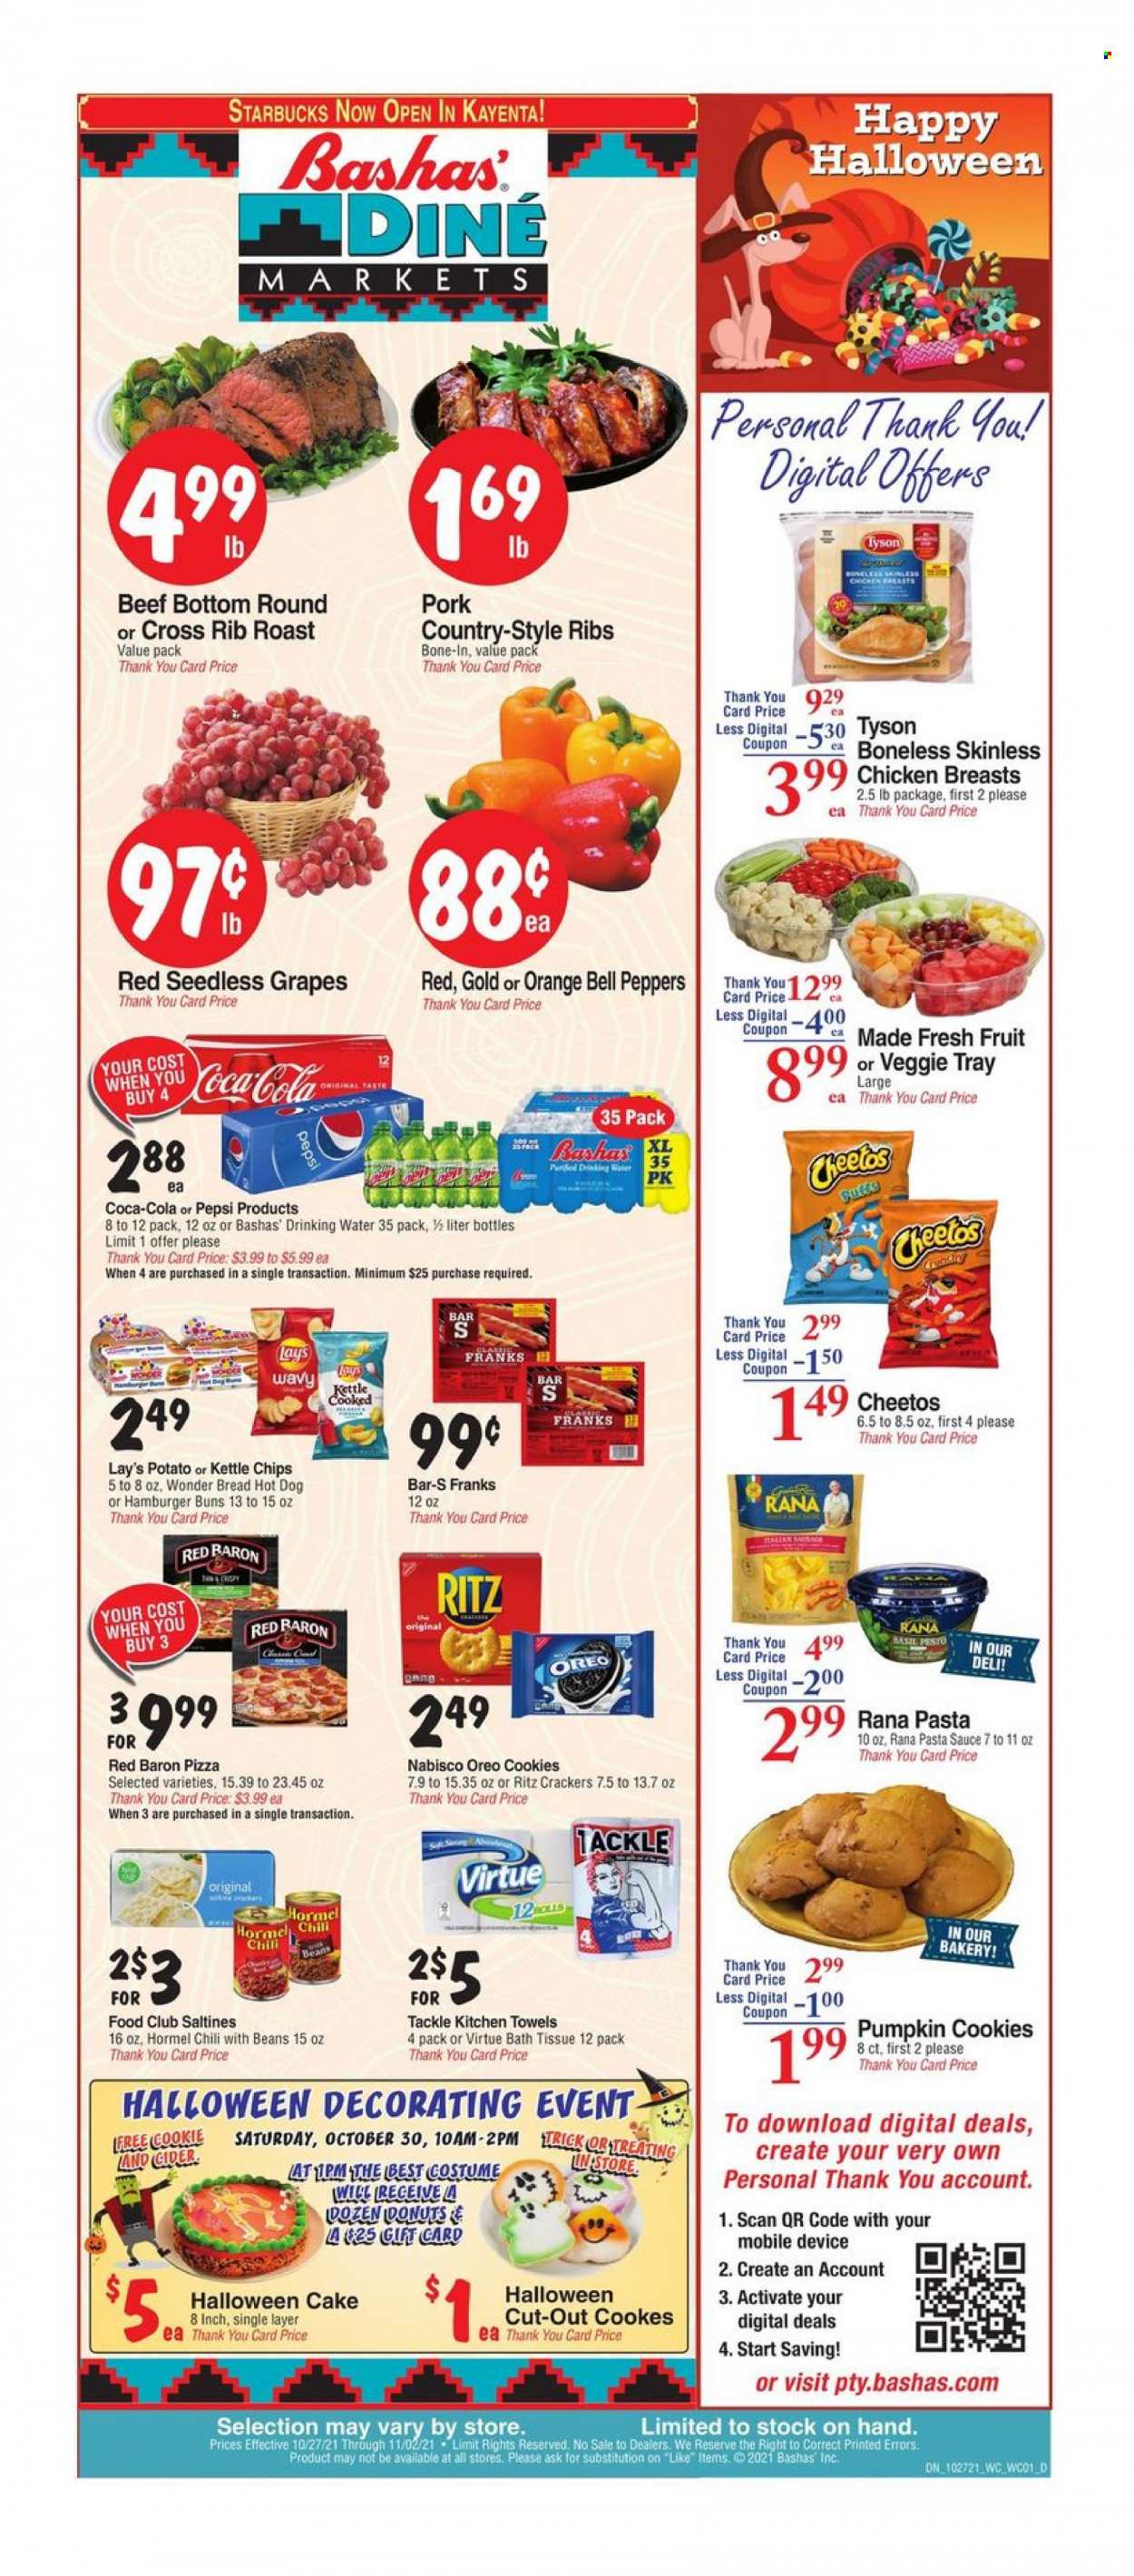 thumbnail - Bashas' Diné Markets Flyer - 10/27/2021 - 11/02/2021 - Sales products - seedless grapes, bread, cake, buns, burger buns, donut, bell peppers, peppers, grapes, oranges, hot dog, pizza, pasta sauce, sauce, Rana, Hormel, Oreo, Red Baron, cookies, crackers, RITZ, Cheetos, chips, Lay’s, saltines, pesto, basil pesto, Coca-Cola, Pepsi, Starbucks, chicken breasts, pork ribs, country style ribs, bath tissue, kitchen towels. Page 1.